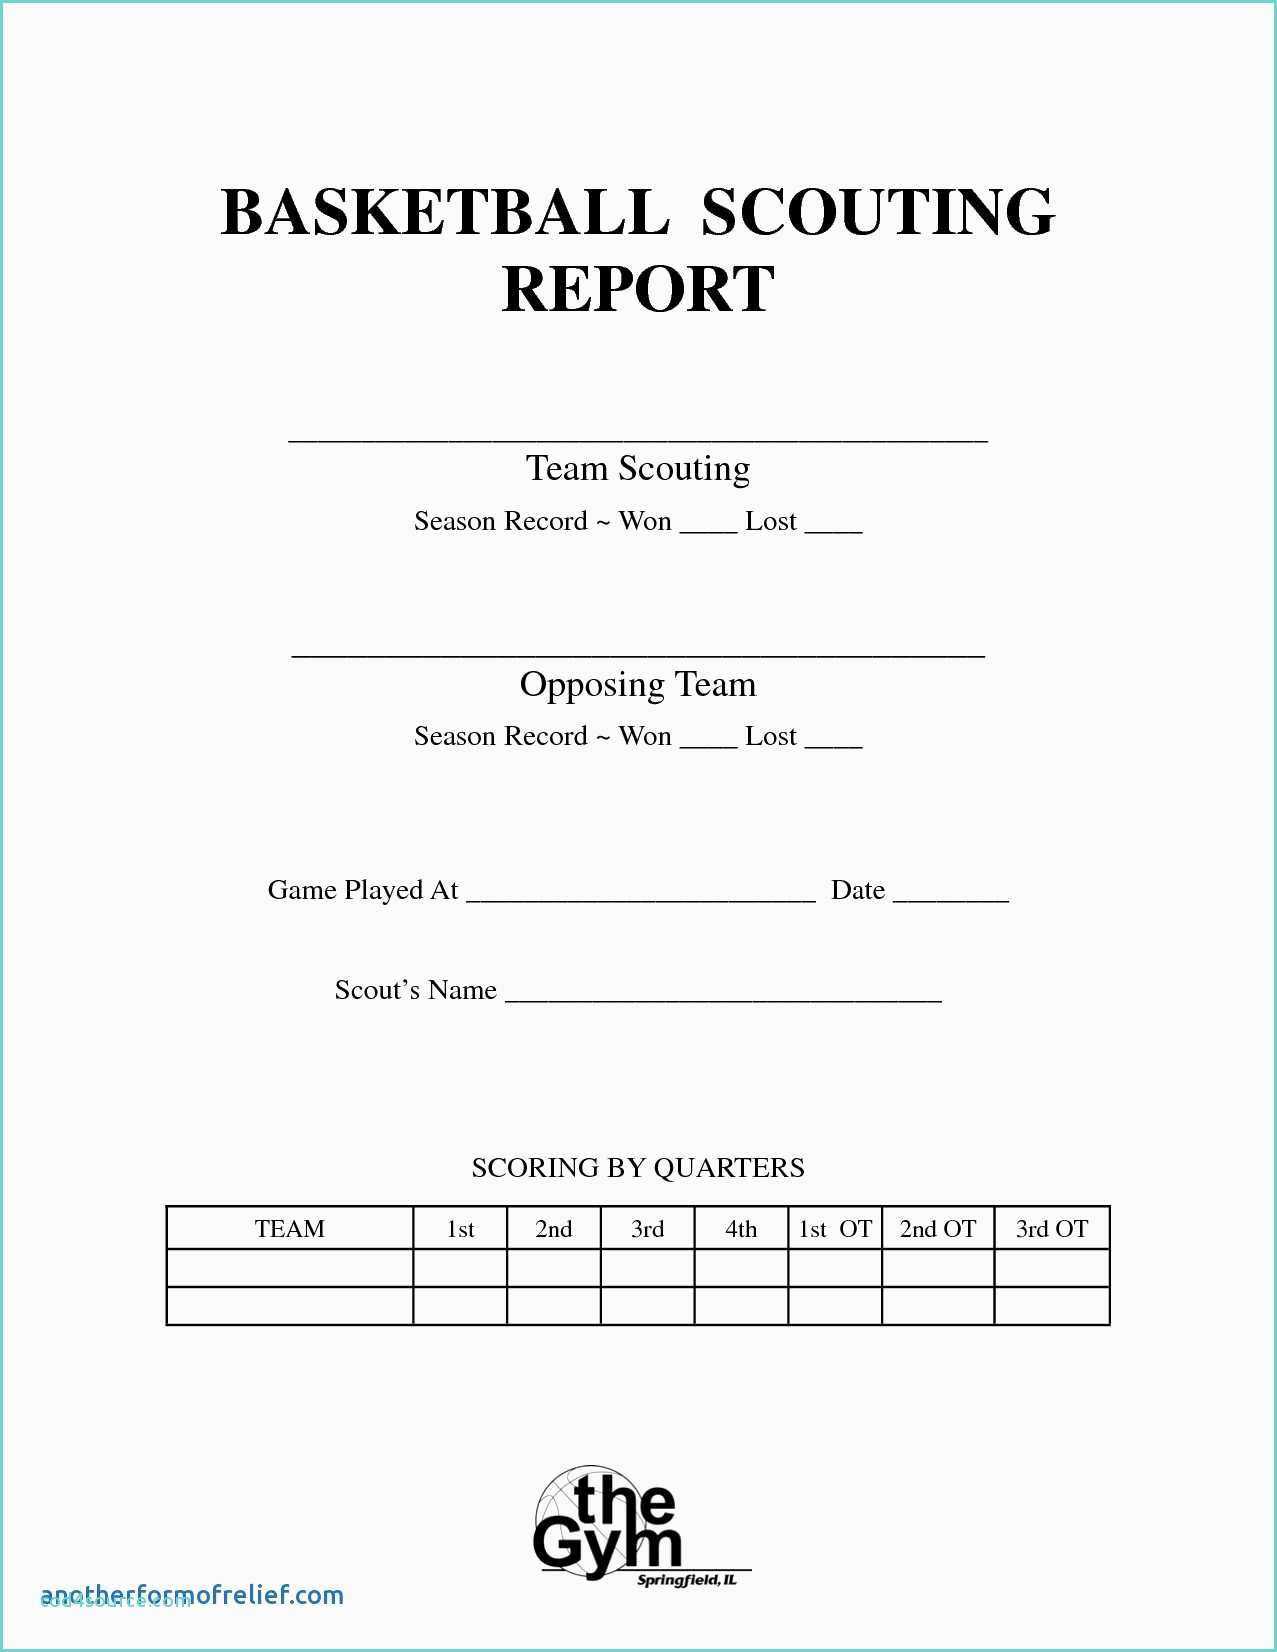 Bowling Spreadsheet And Basketball Scouting Report Template In Scouting Report Template Basketball